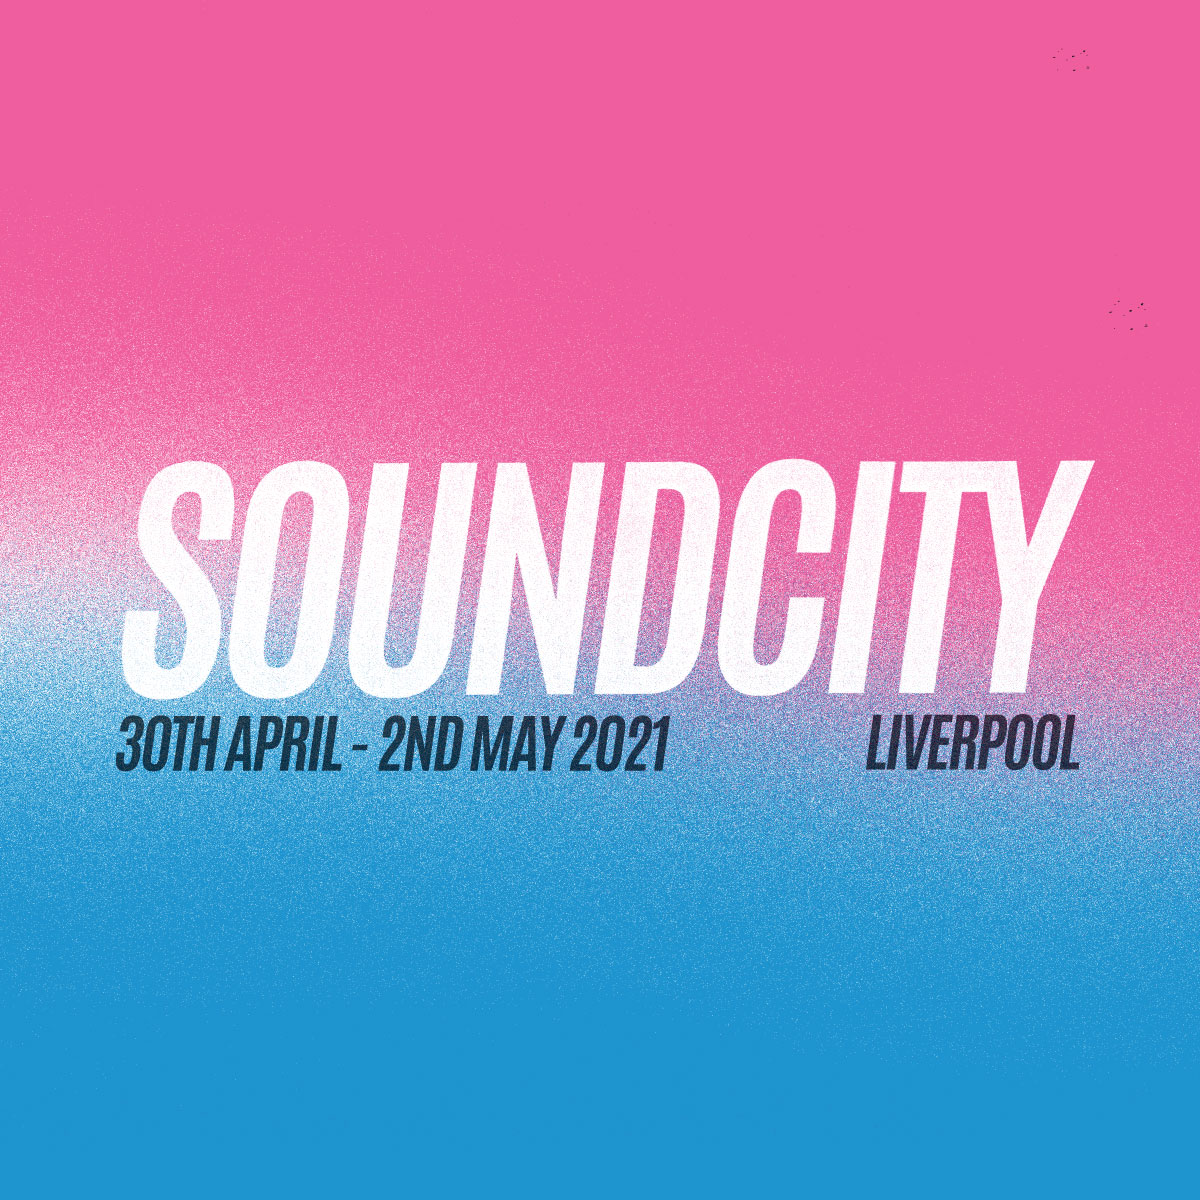 split box - top half is pink fading into a blue bottom half with white wording that says soundcity and underneath in black font says 30 april -2 may 2021, Liverpool